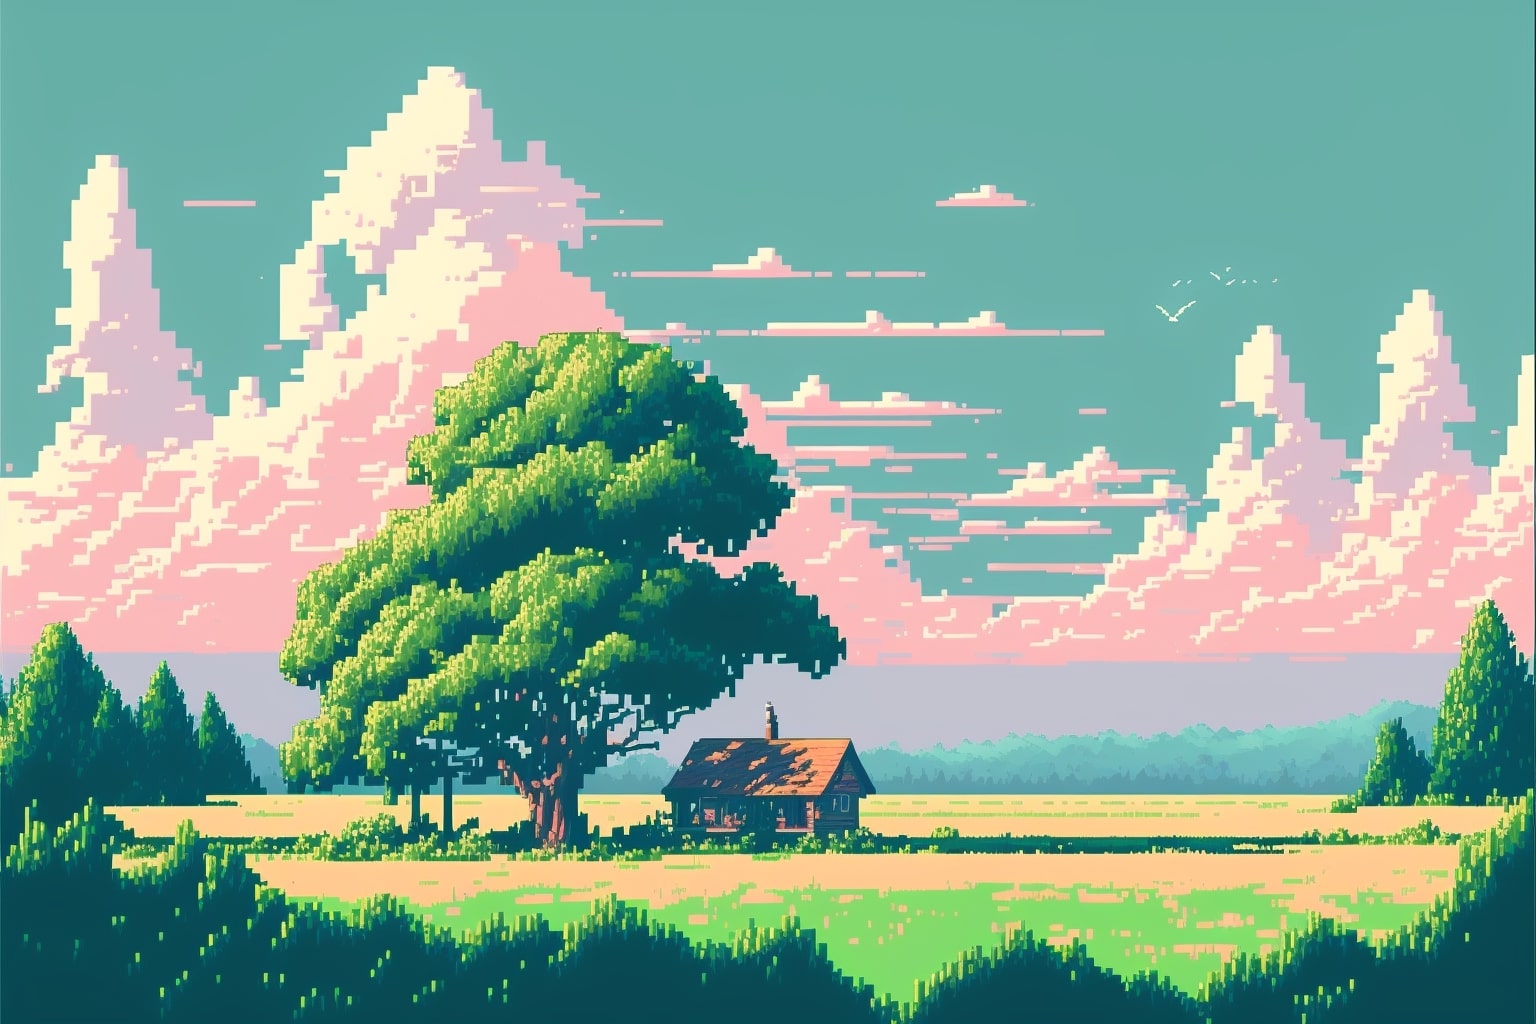 Pixelated landscape with a house and a tree.